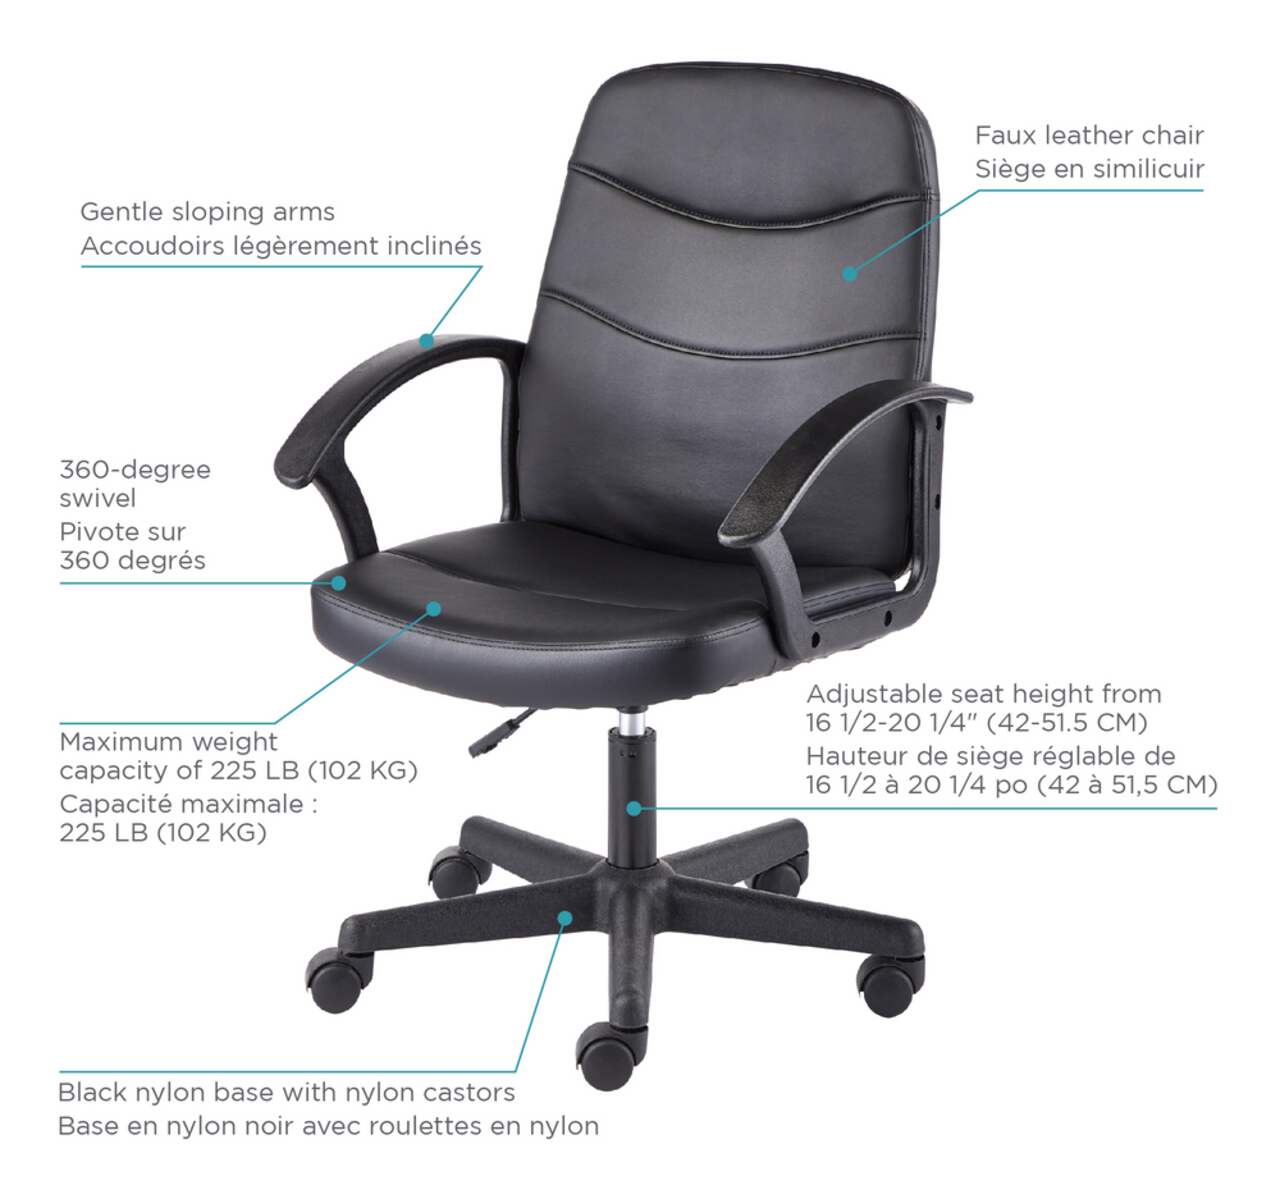 Office Chair and Seating Manufacturer, Best-in-Class